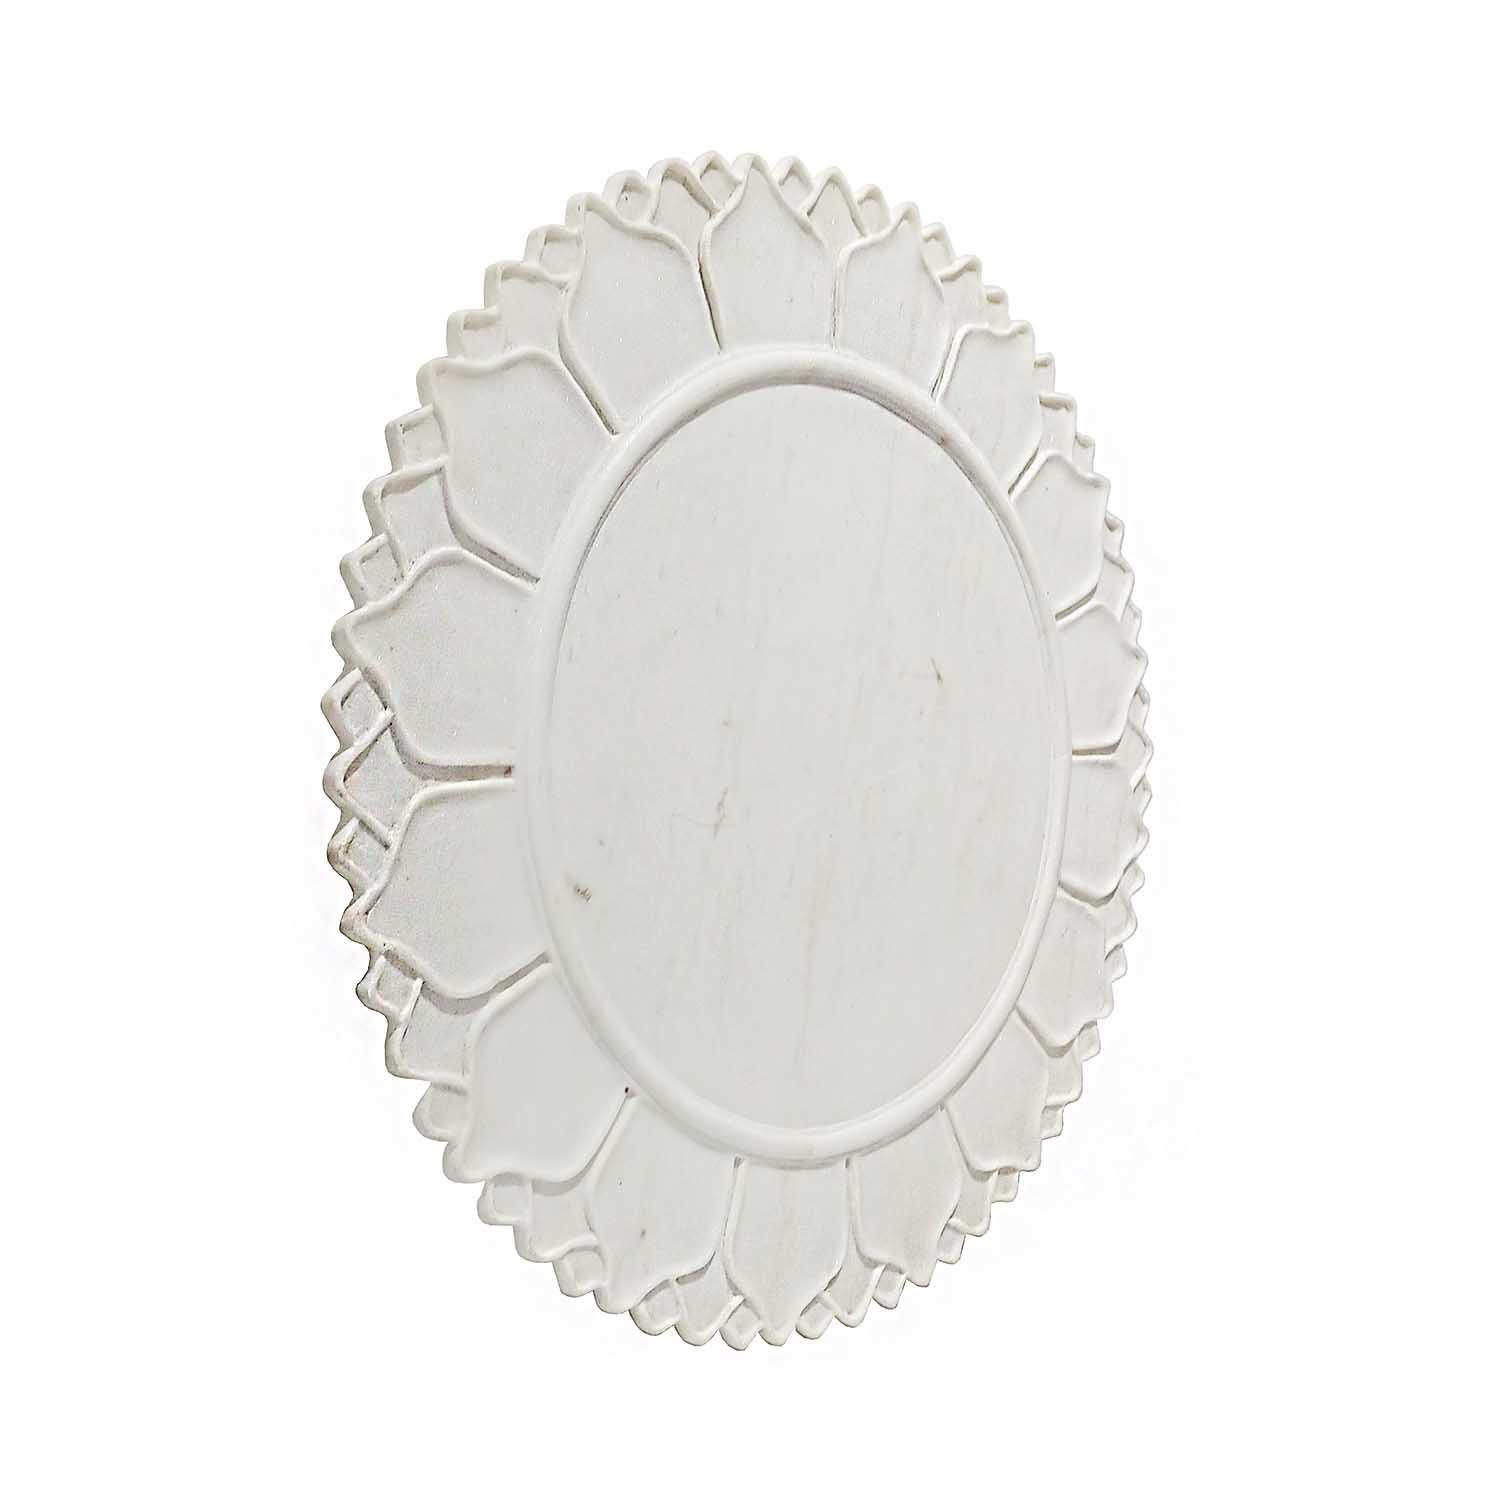 Indian Hand-Carved White Marble Server / Charger / Plate For Sale